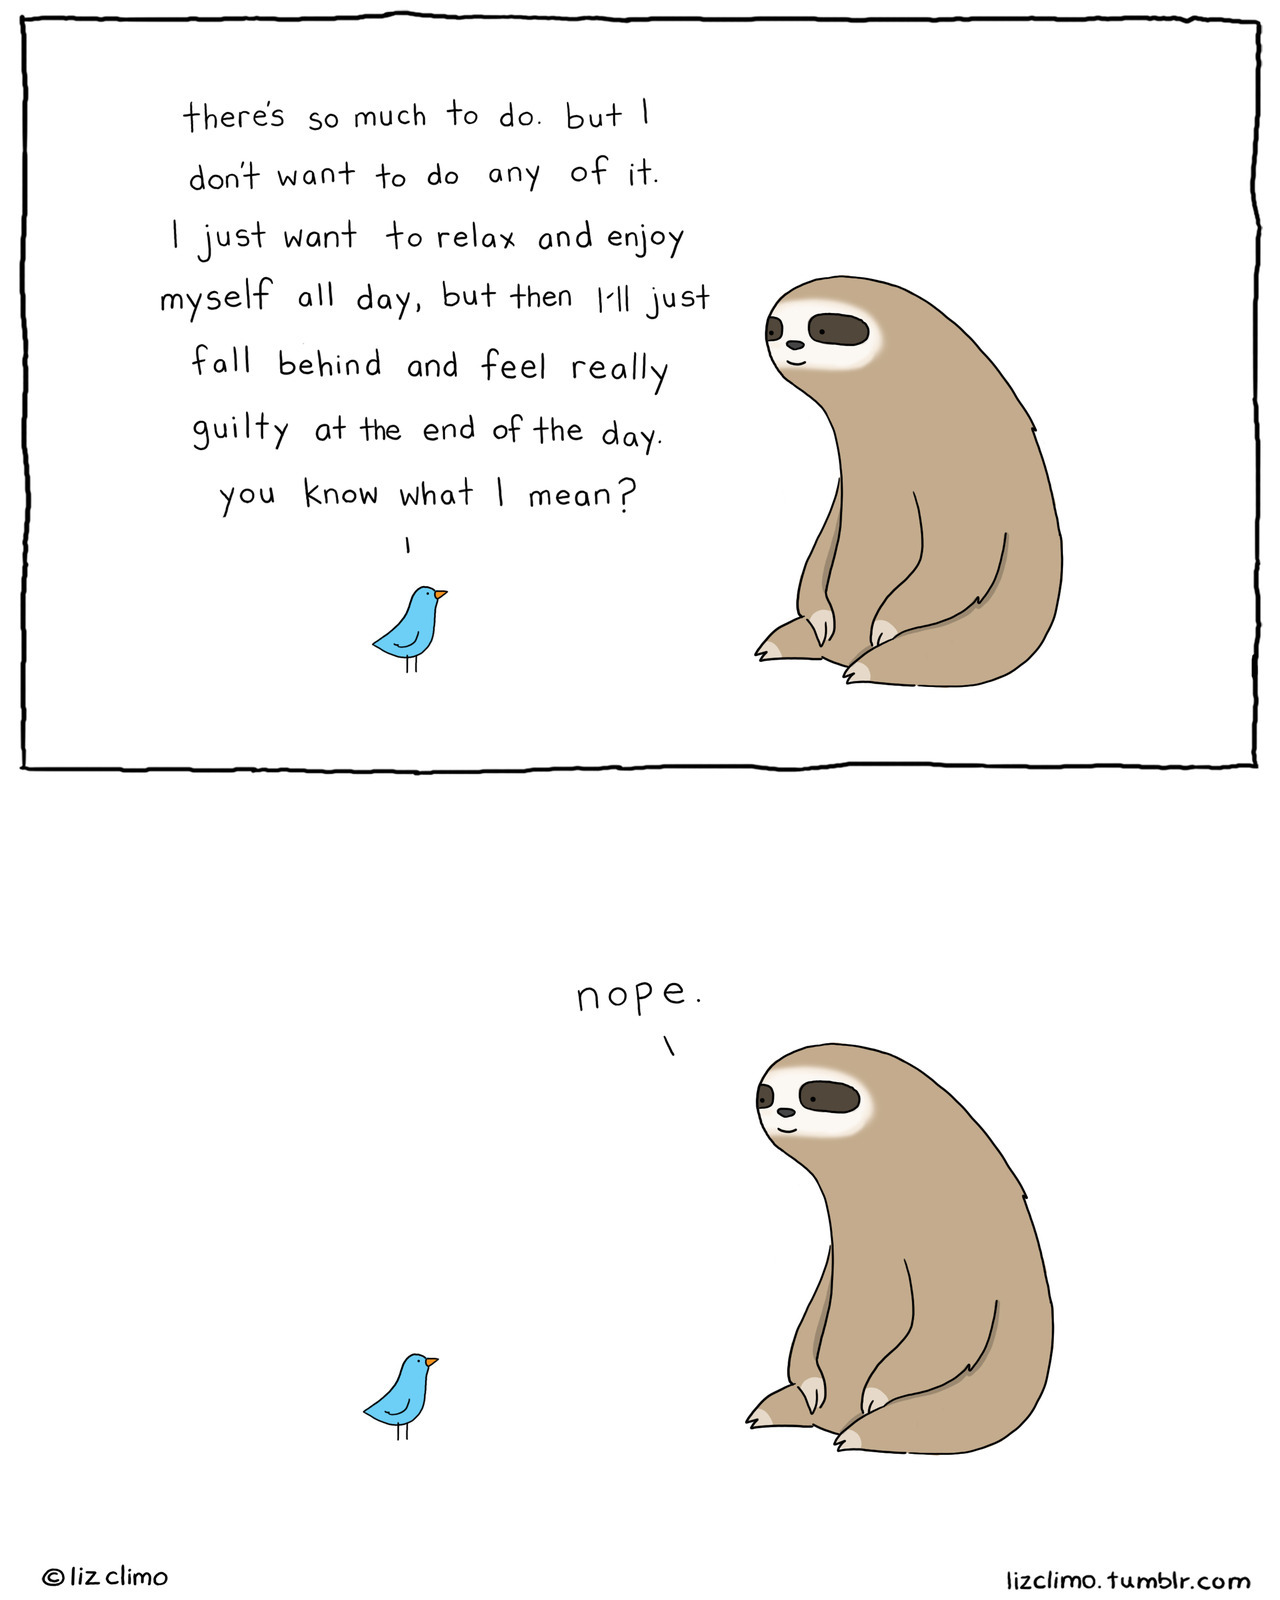 lizclimo:
“Are you the bird or the sloth?
”